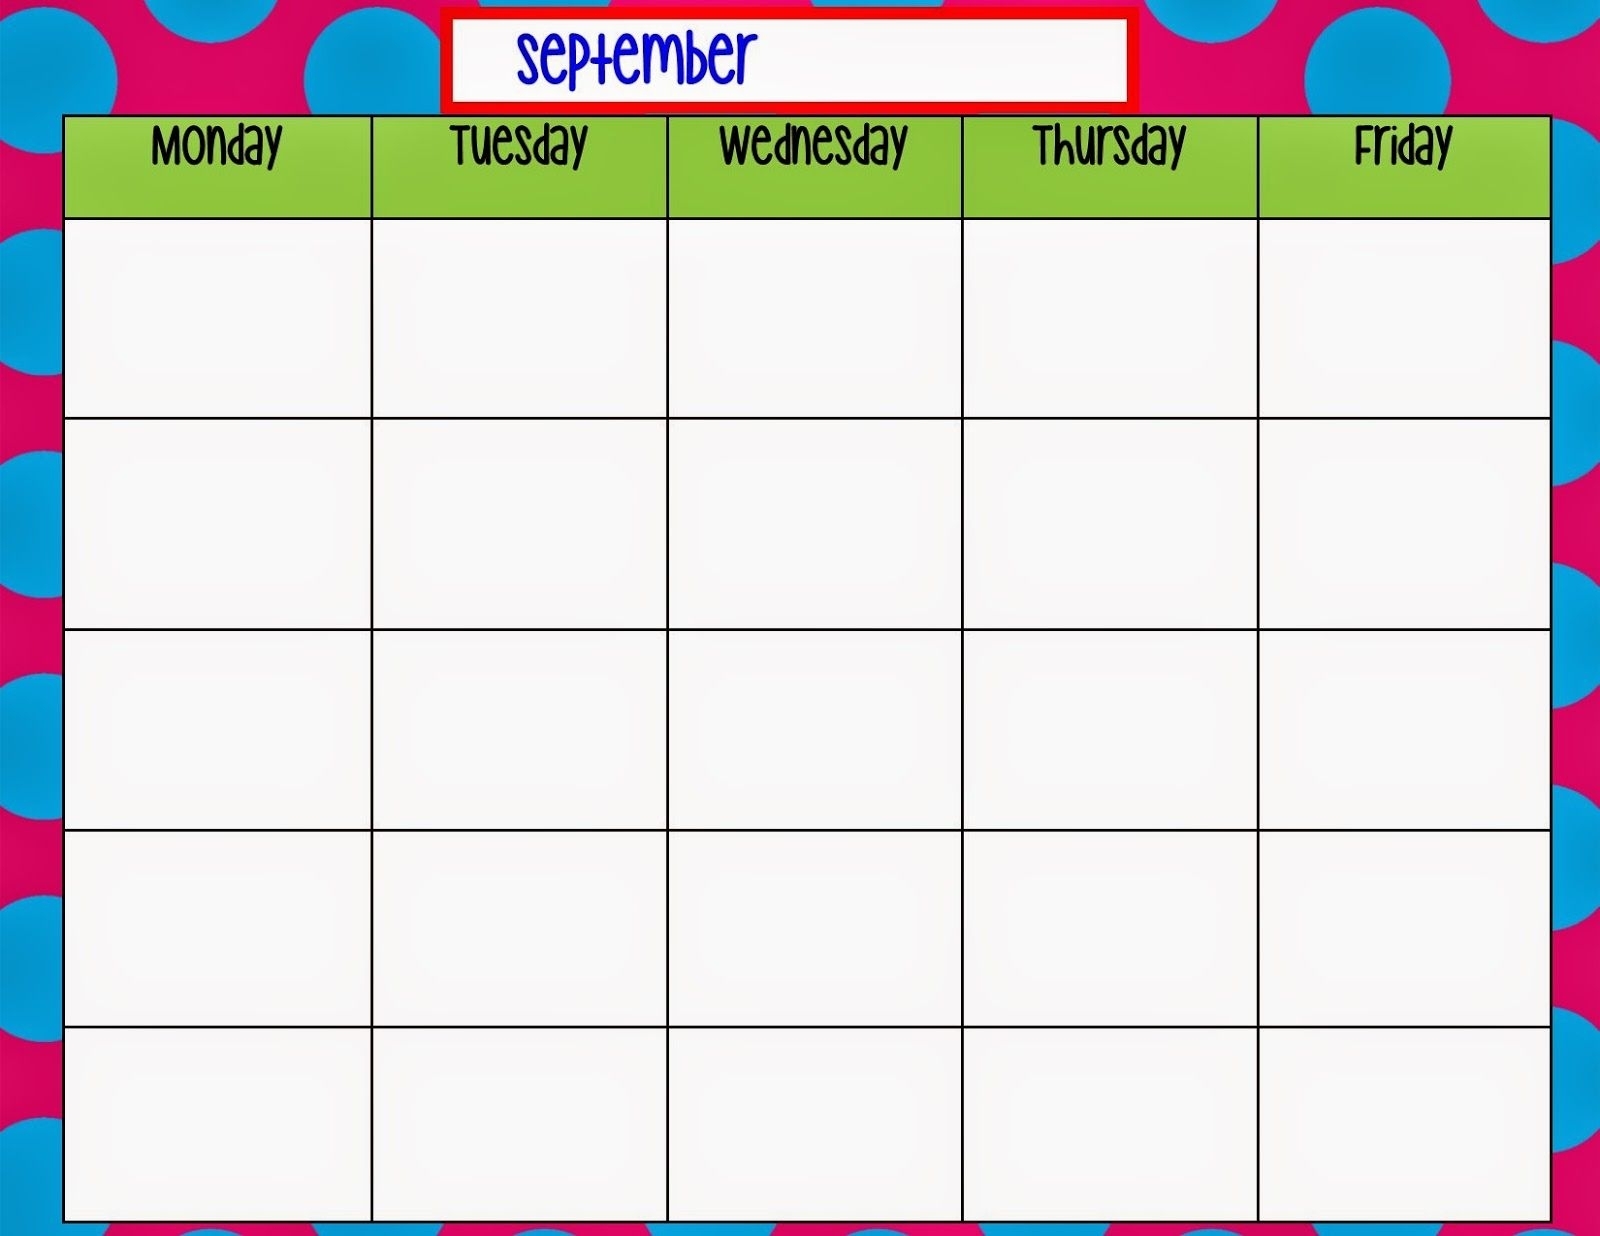 Schedule Template Monday Through Friday Weekly R Word Monthly | Smorad within Monthly Calendars Monday Through Friday